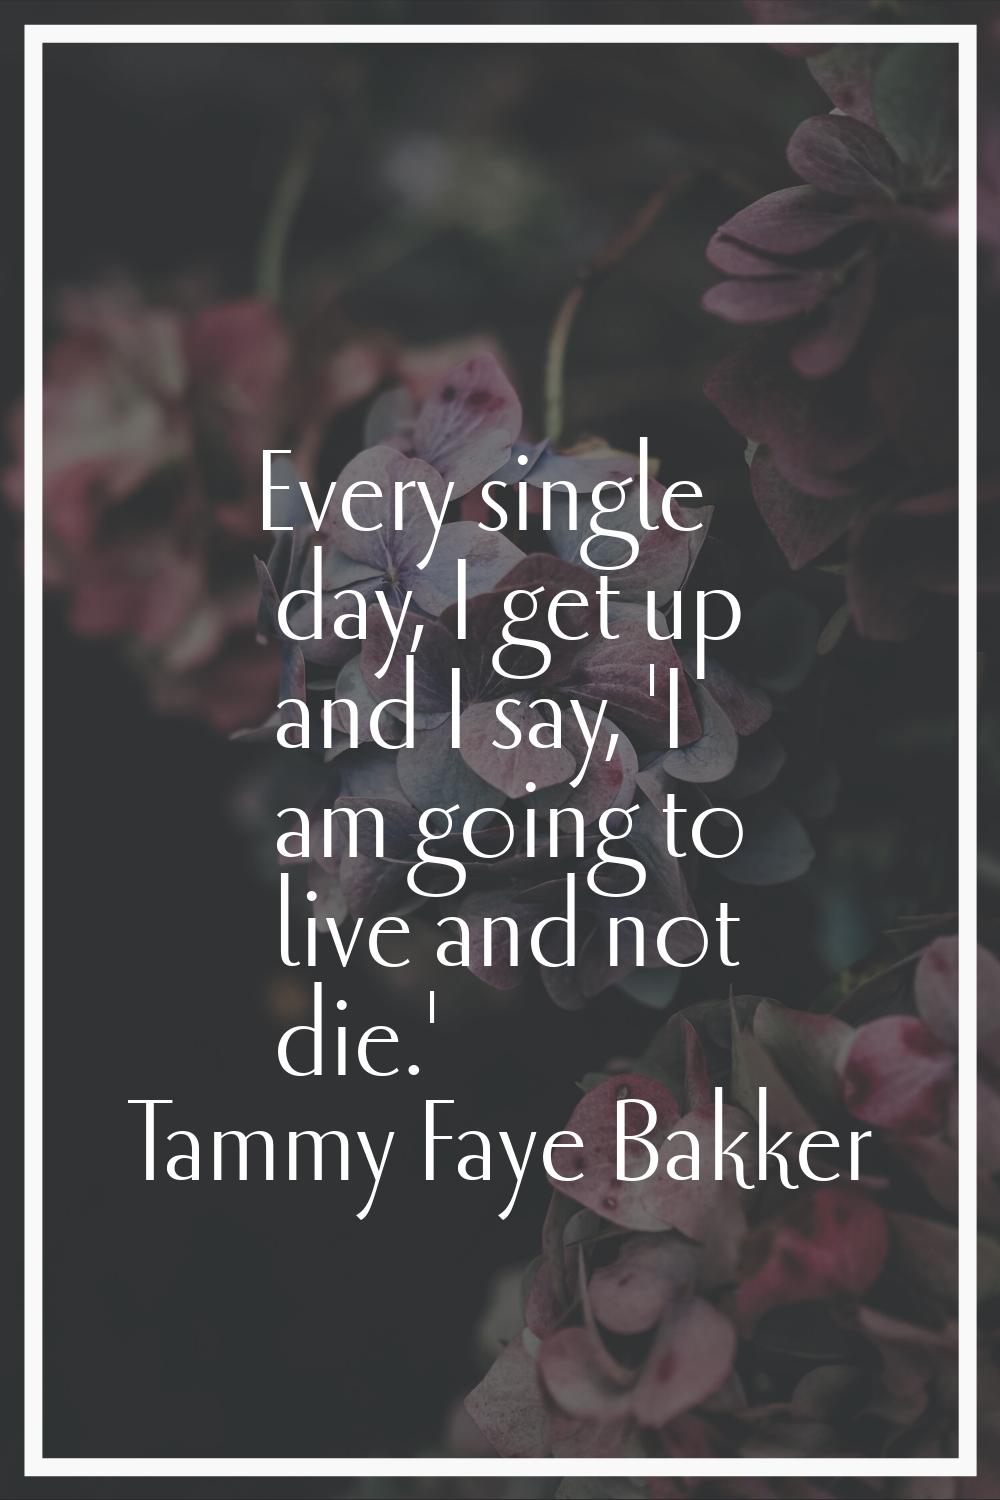 Every single day, I get up and I say, 'I am going to live and not die.'